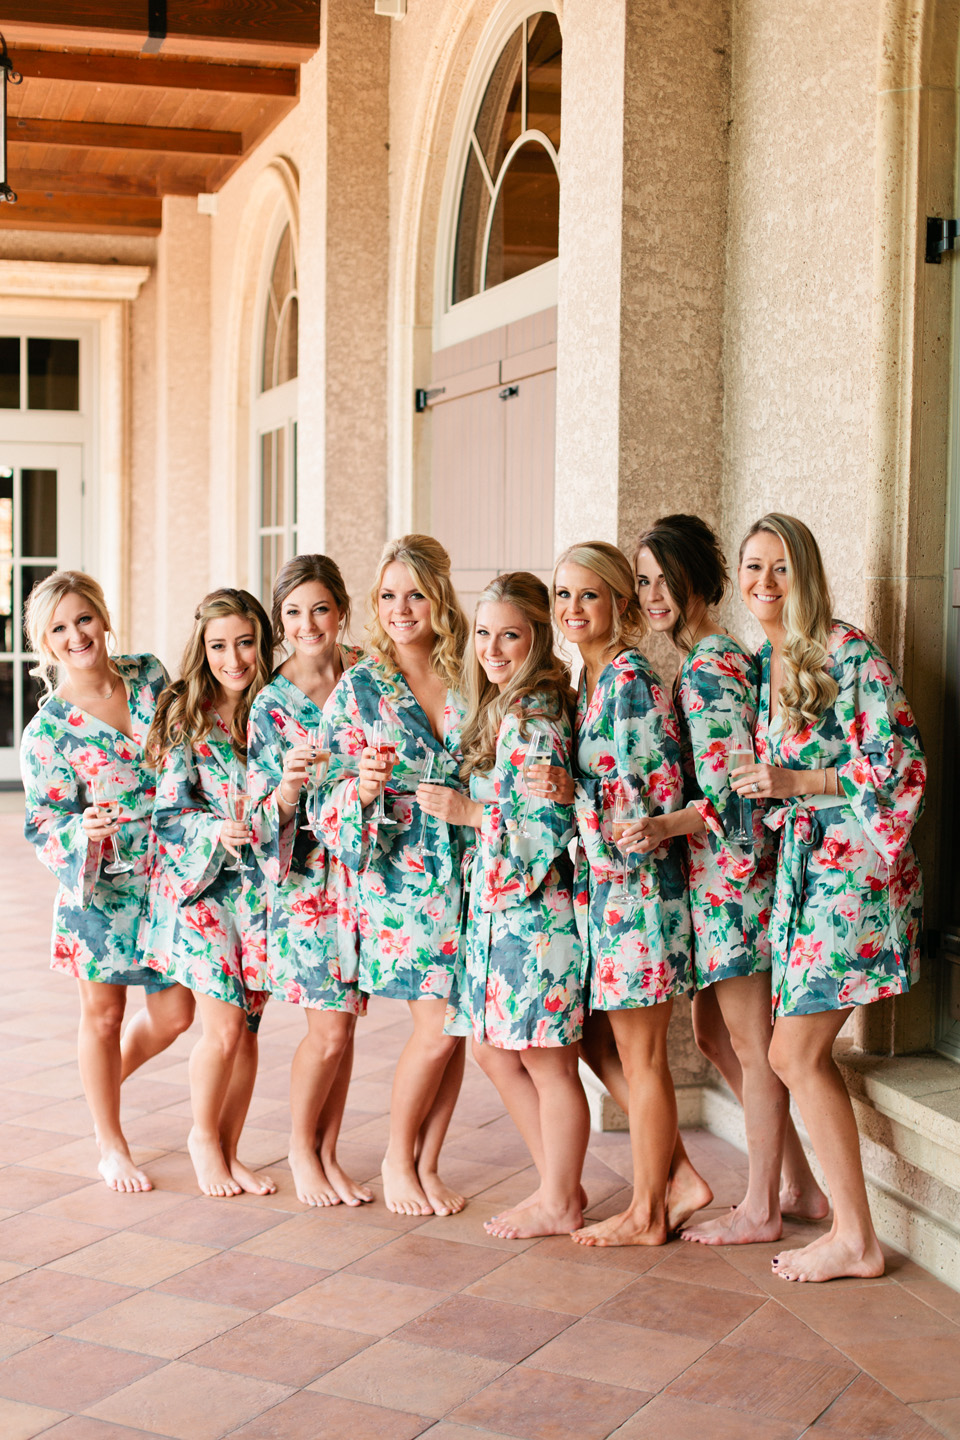 Picture of bridesmaids in floral robes getting ready for a wedding day at TPC Sawgrass in Ponte Vedra, Florida